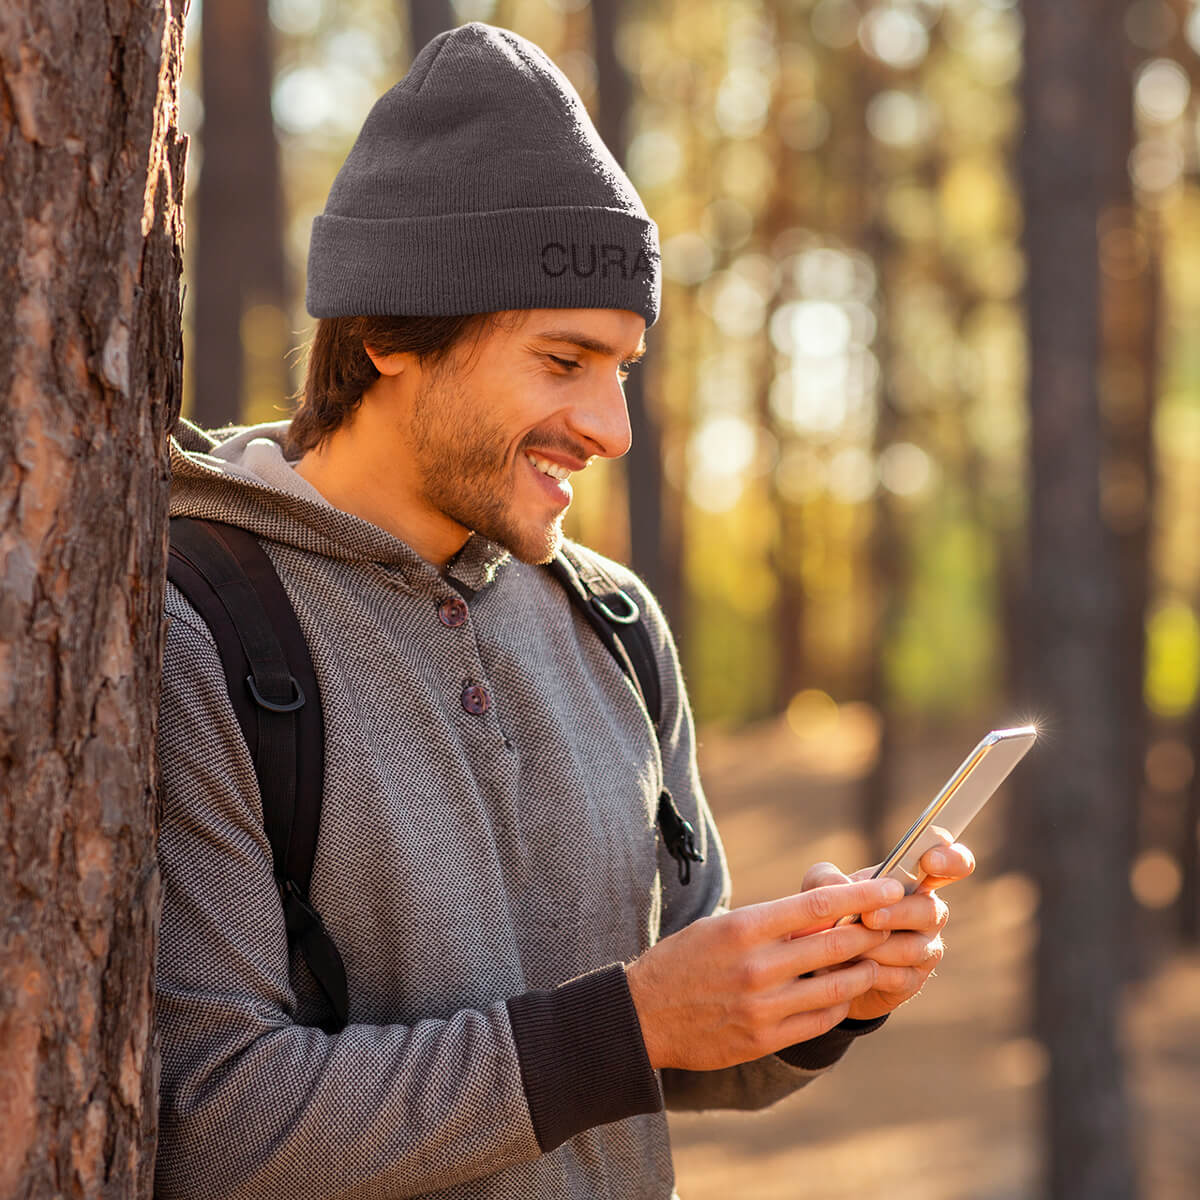 Outdoorsman wearing dark grey beanie with Curative Printing logo while texting